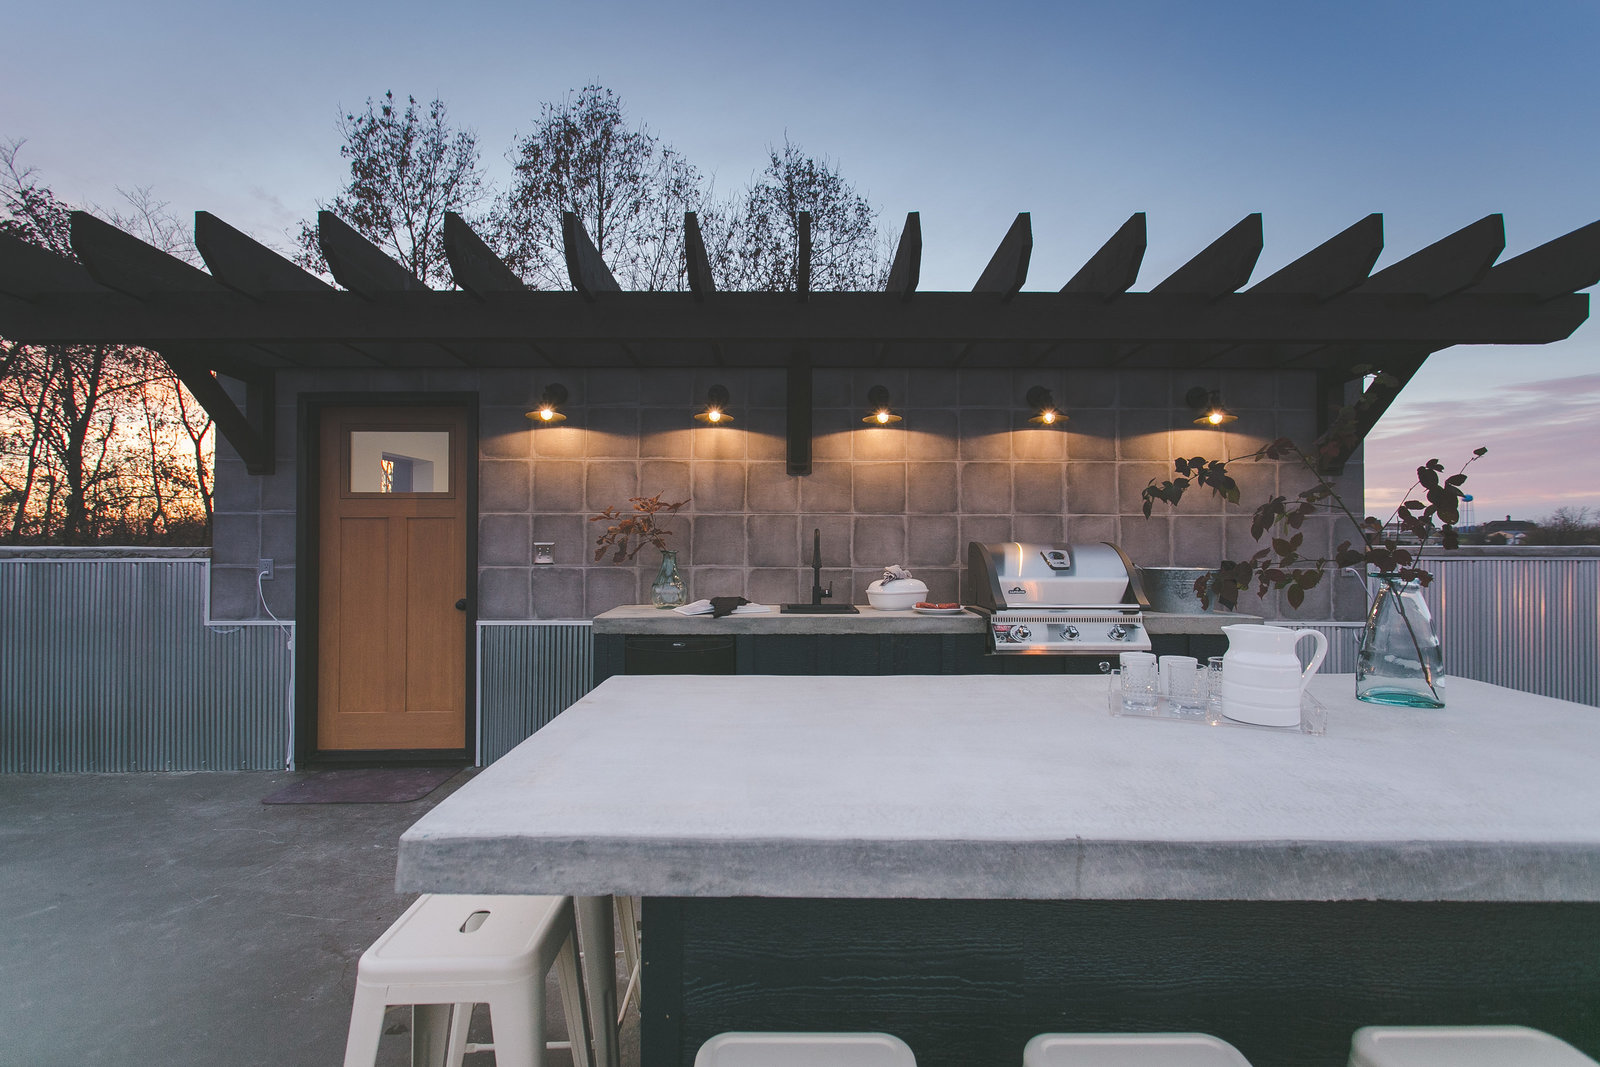 Modern BnB rooftop kitchen design with concrete countertops, black exterior sconces and white barstools. Custom mid tone wood door softens the look of the industrial metal siding surrounding the rooftop.